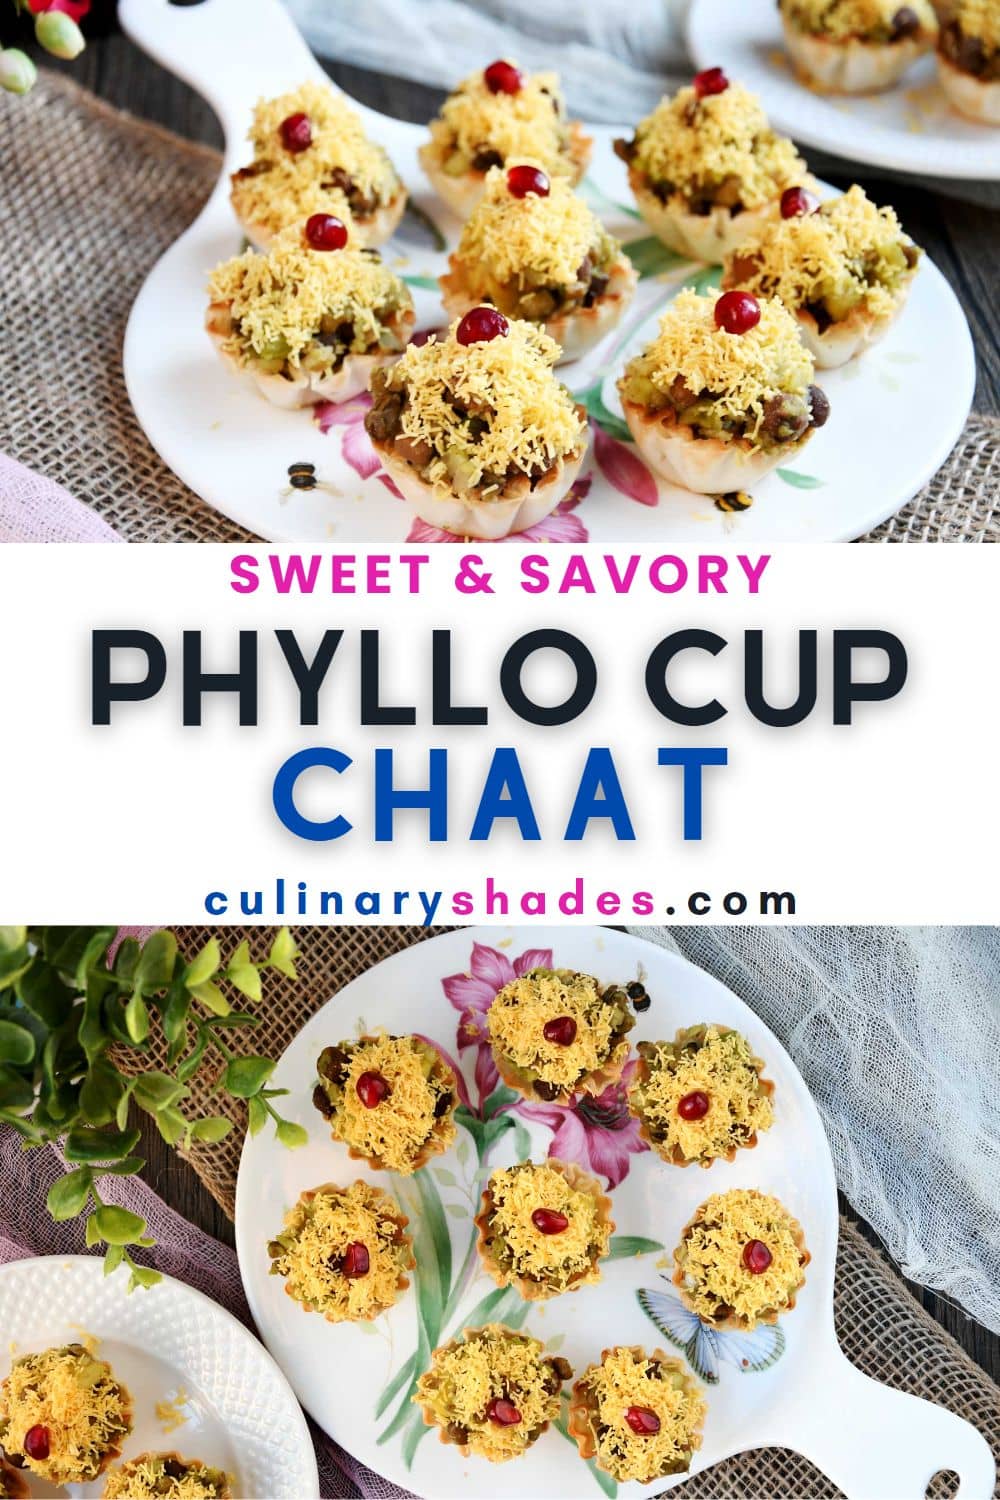 Phyllo cup chaat pin.